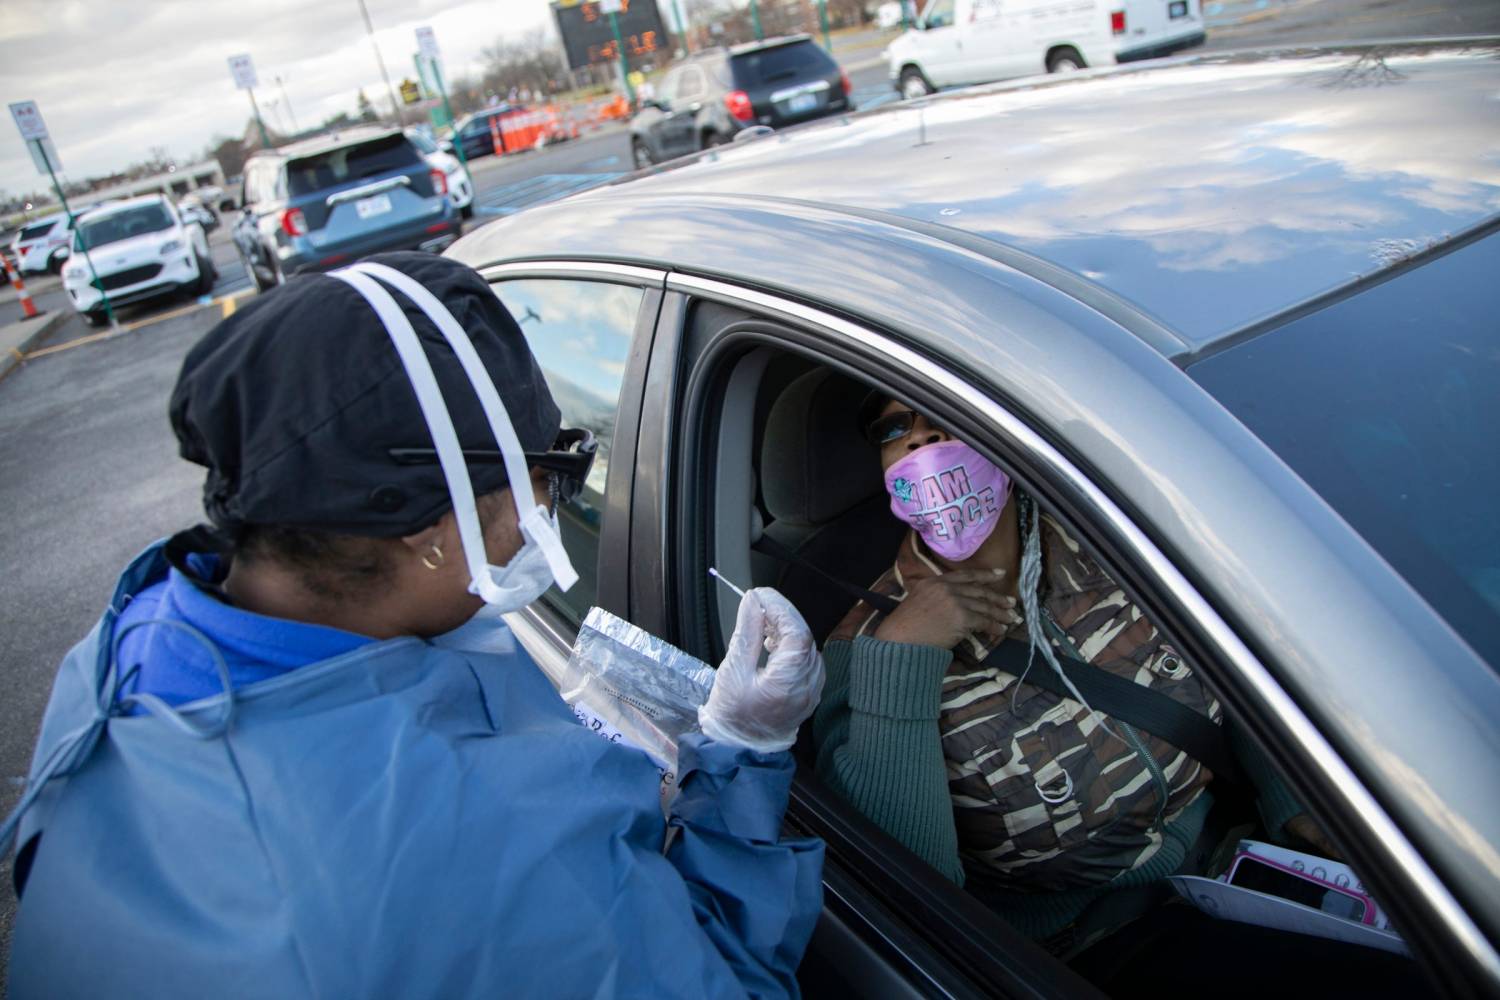 Ebone Jolly RN, prepares to administer a Covid-19 test to Shu Rice, 59, of Detroit in the parking lot at The Joseph Walker Williams Community Center Friday Nov. 13, 2020.Covidtesting 111320 15 Mw